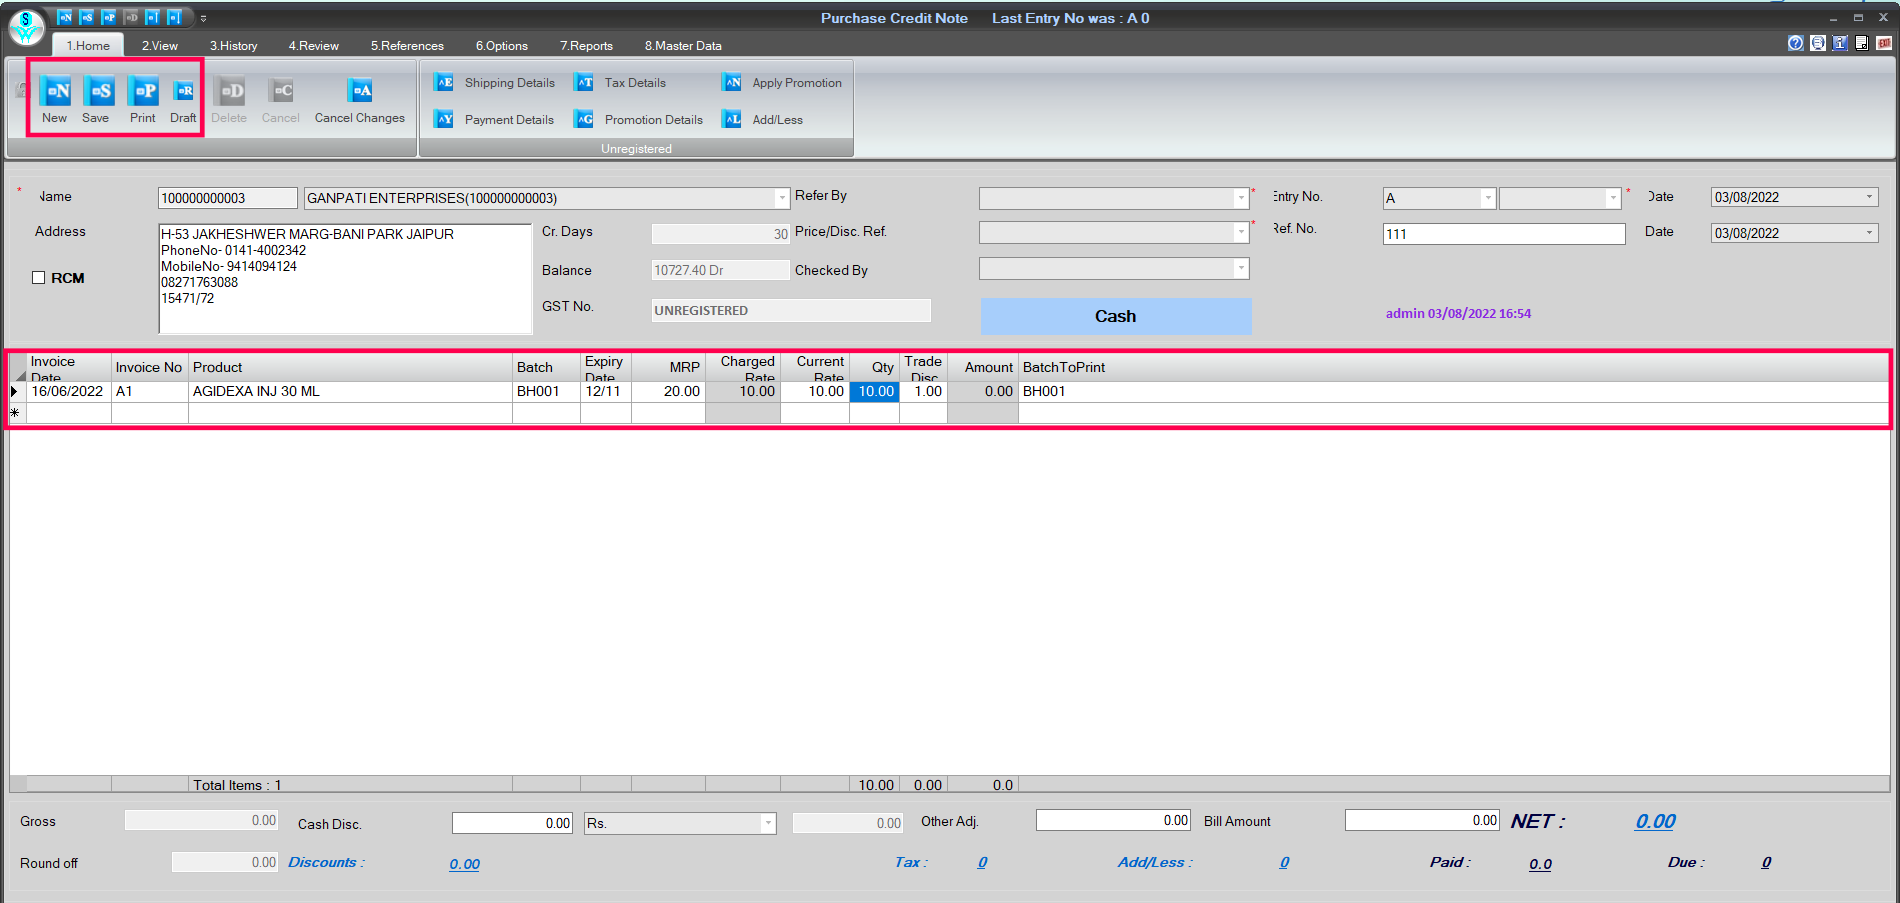 Purchase credit note creation in retailgraph.